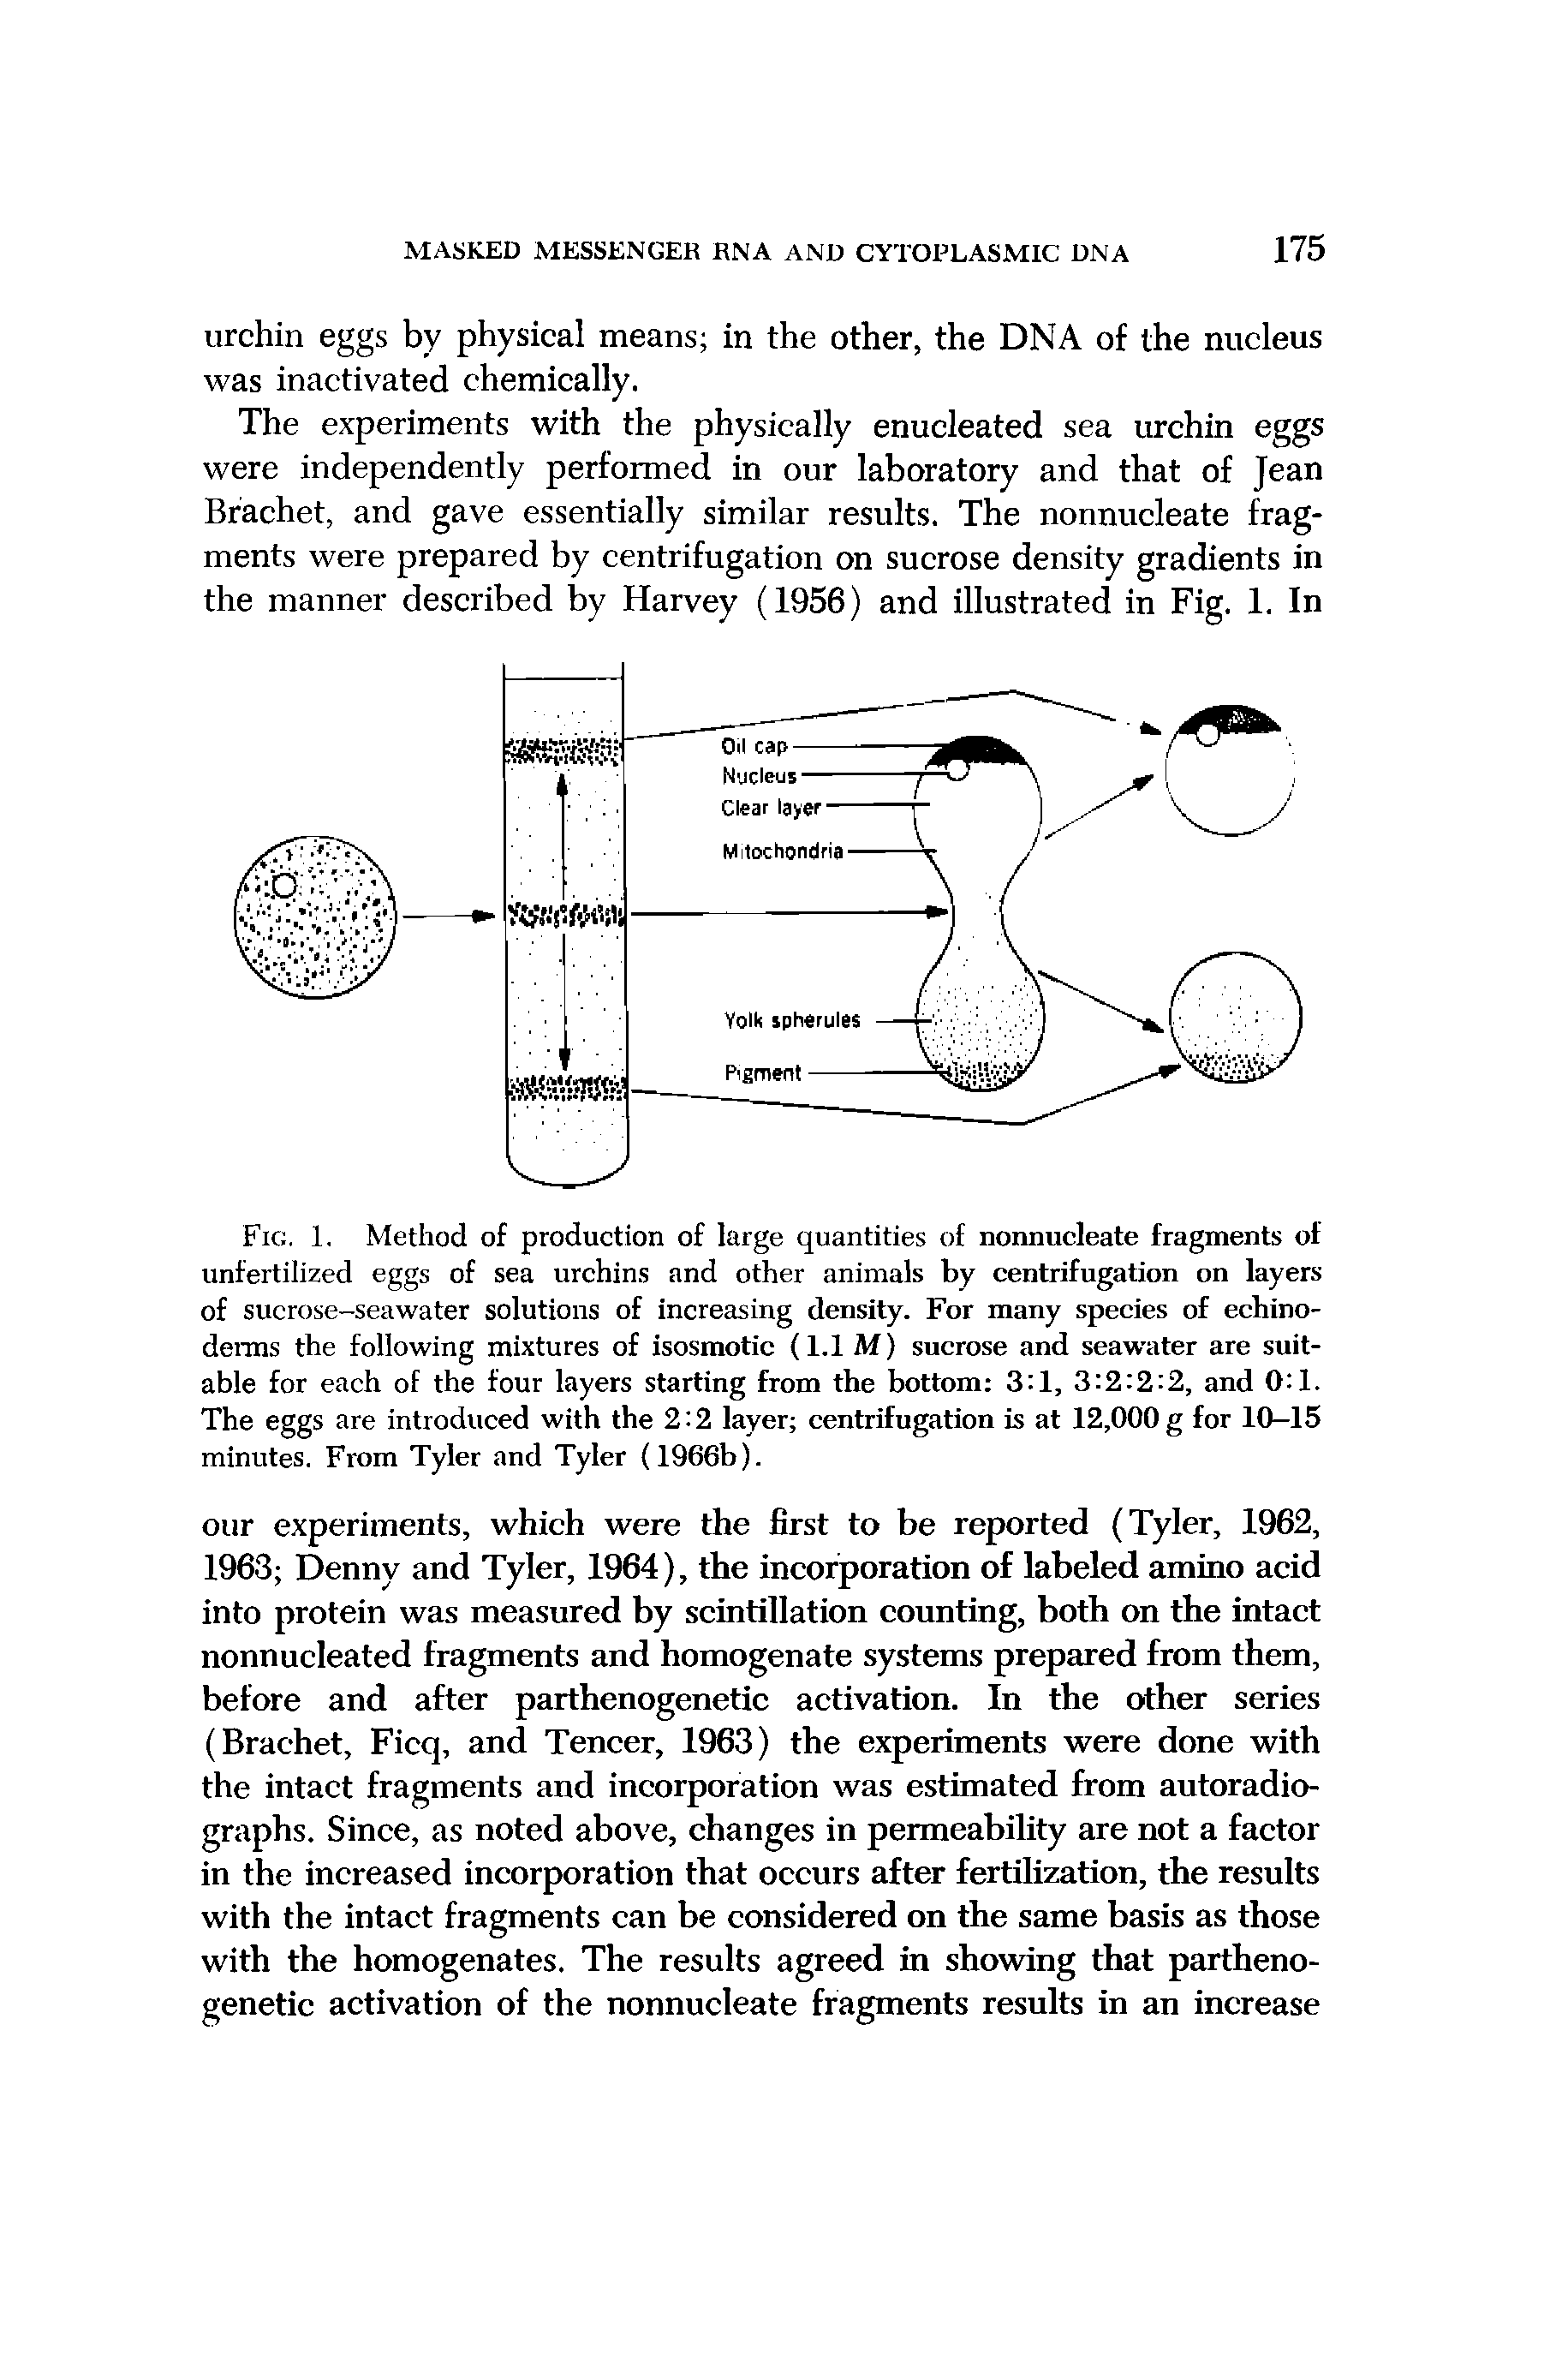 Fig. 1, Method of production of large quantities of nonnucleate fragments of unfertilized eggs of sea urchins and other animals by centrifugation on layers of sucrose-seawater solutions of increasing density. For many species of echino-deims the following mixtures of isosmotic (1.1 M) sucrose and seawater are suitable for each of the four layers starting from the bottom 3 1, 3 2 2 2, and 0 1. The eggs are introduced with the 2 2 layer centrifugation is at 12,000g for 10-15 minutes. From Tyler and Tyler (1966b). ...